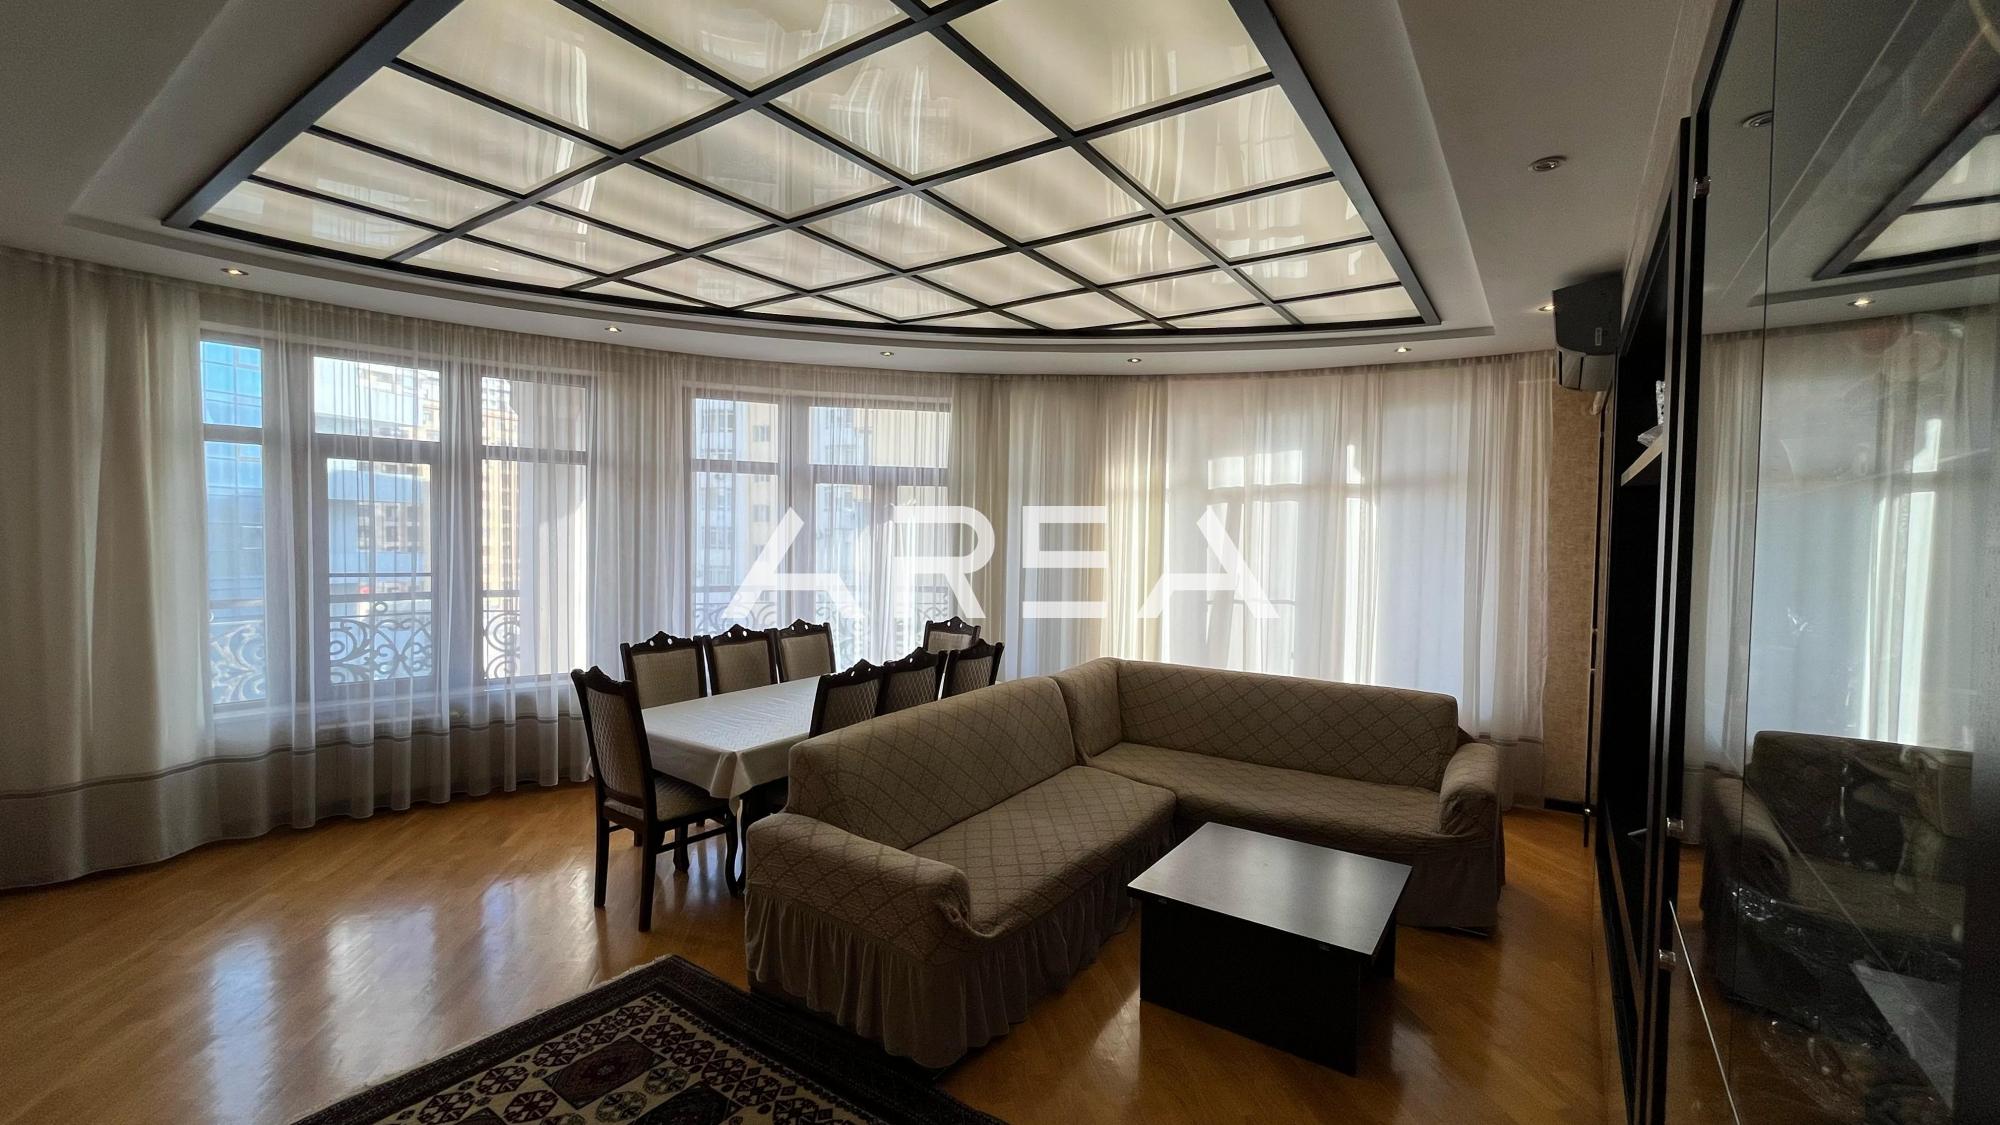 An apartment with 4 rooms, renovated, is for sale on 